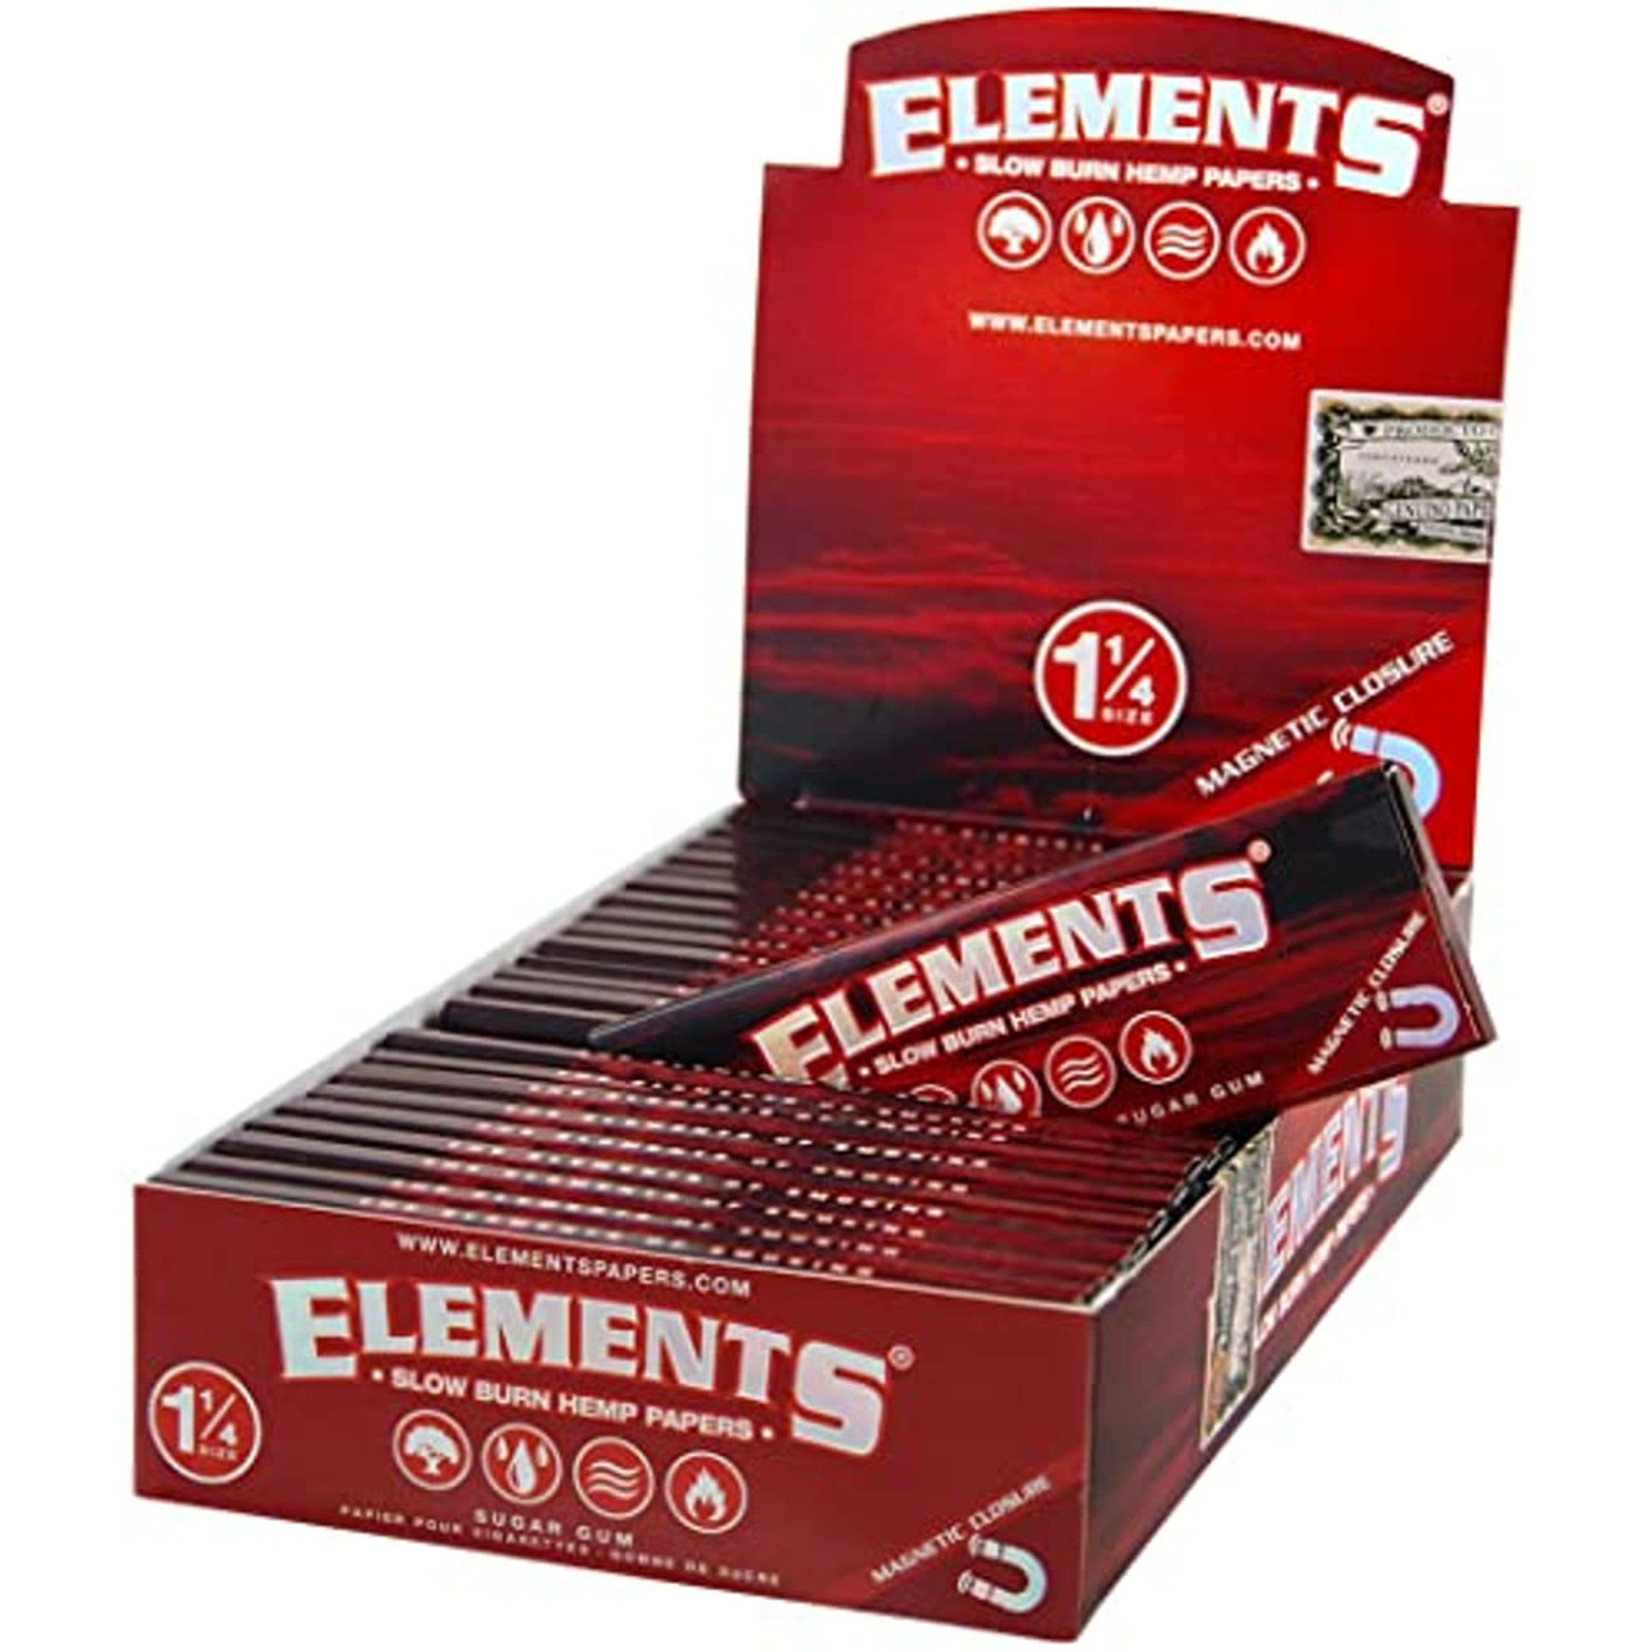 Elements Elements 1 1/4 Ultra Thin Rice Paper Pre-Rolled Cones